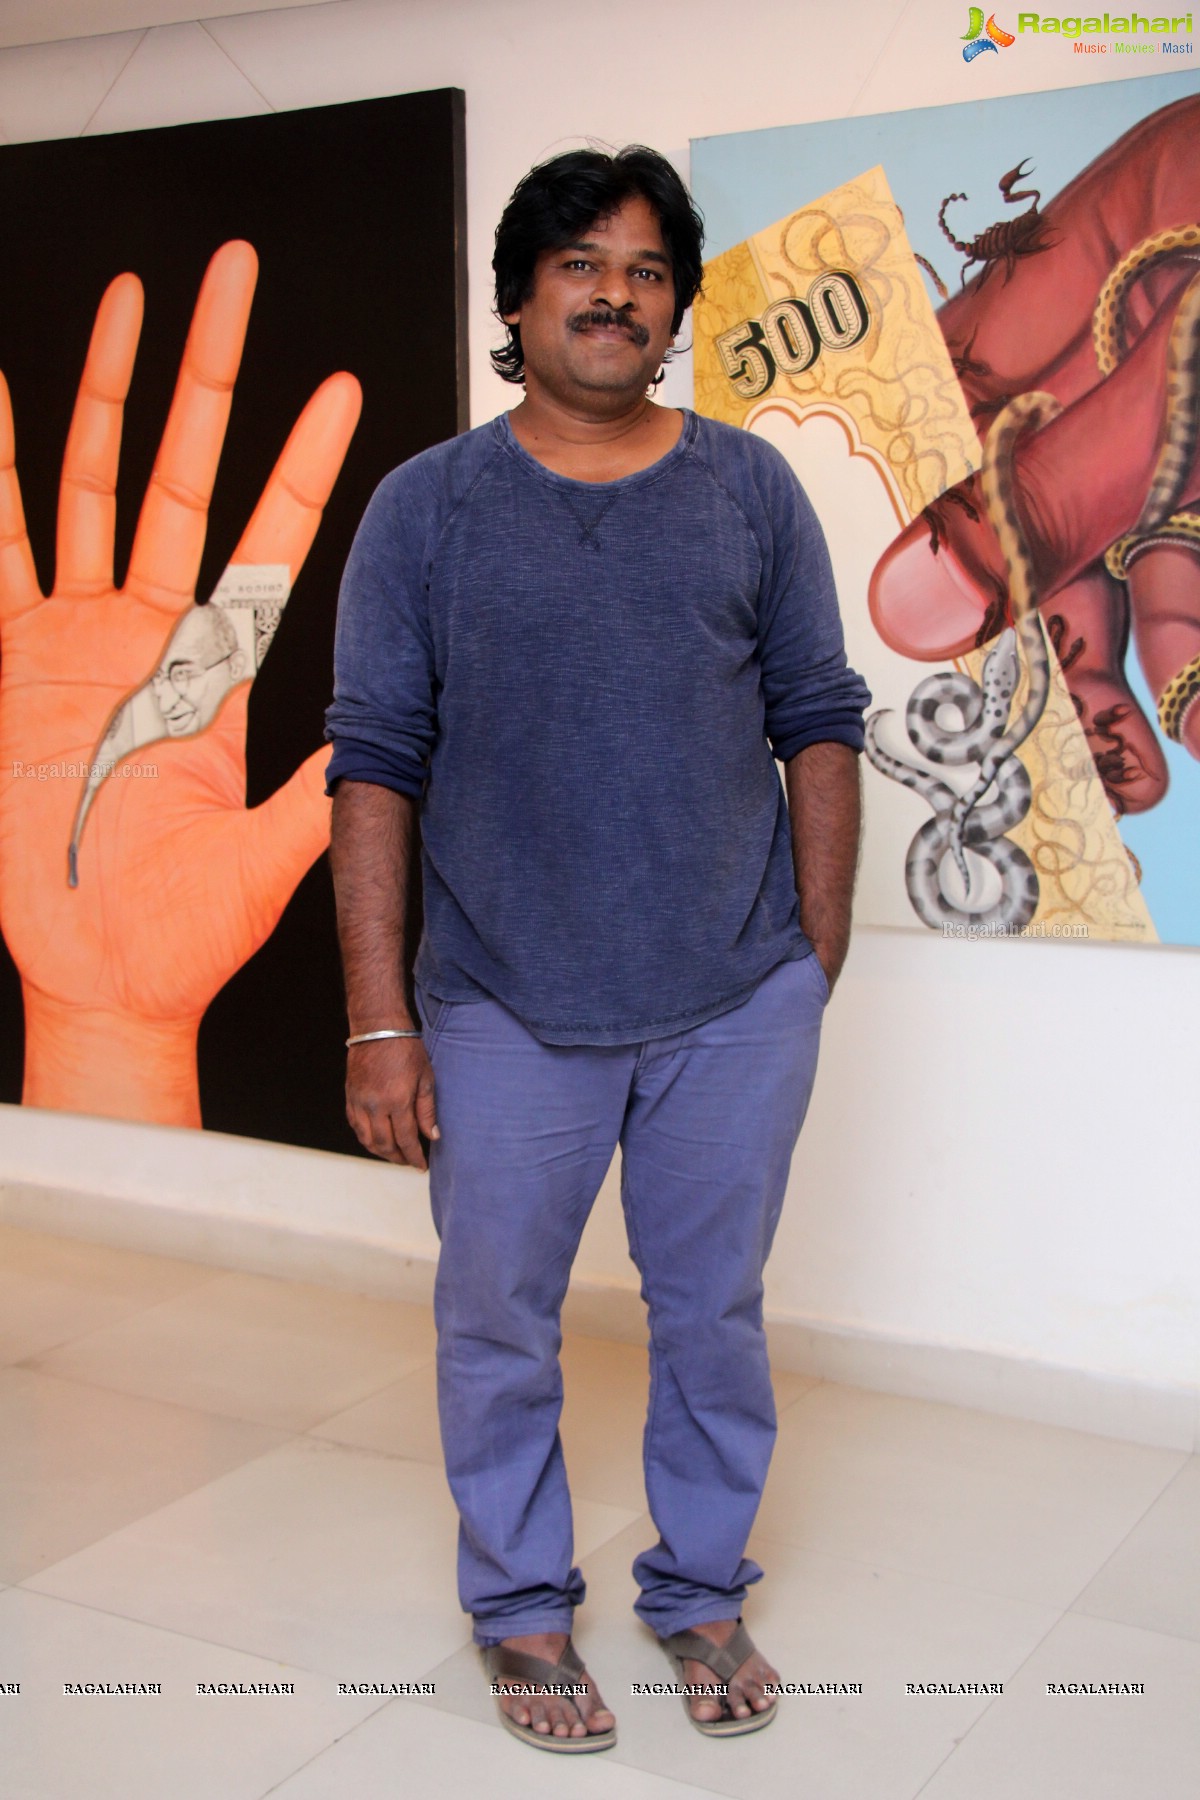 Money Matters - An Exhibition of Paintings by Thirumala Thirupathi at Iconart Gallery